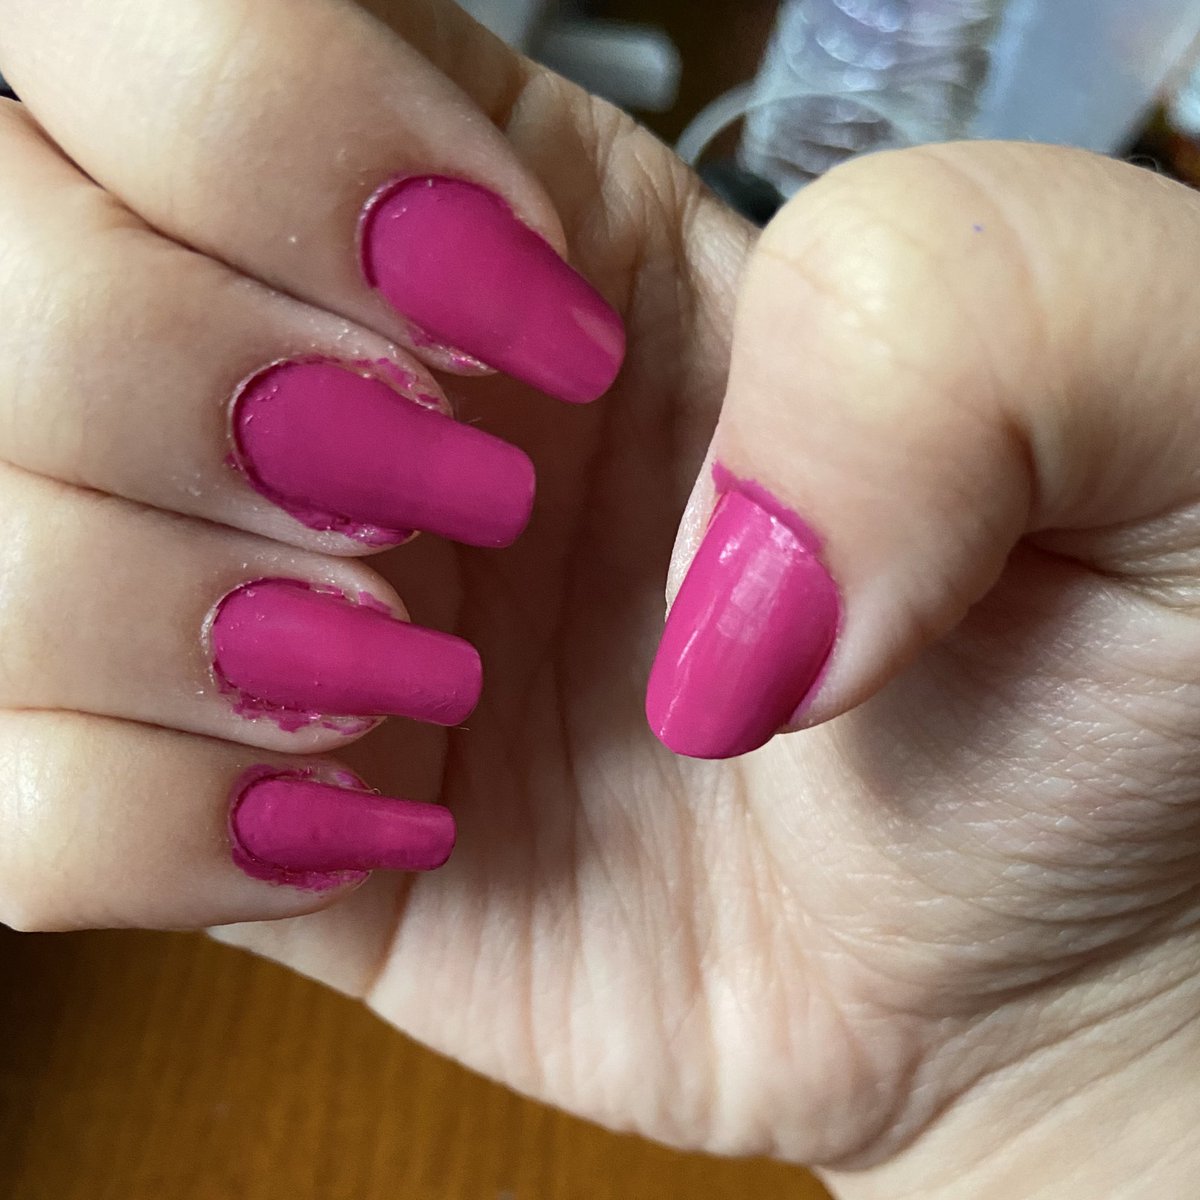 I tried glittery polish but I hate when you can still see the nail bed even after multiple coats so I took it off and switched to fuchsia :)